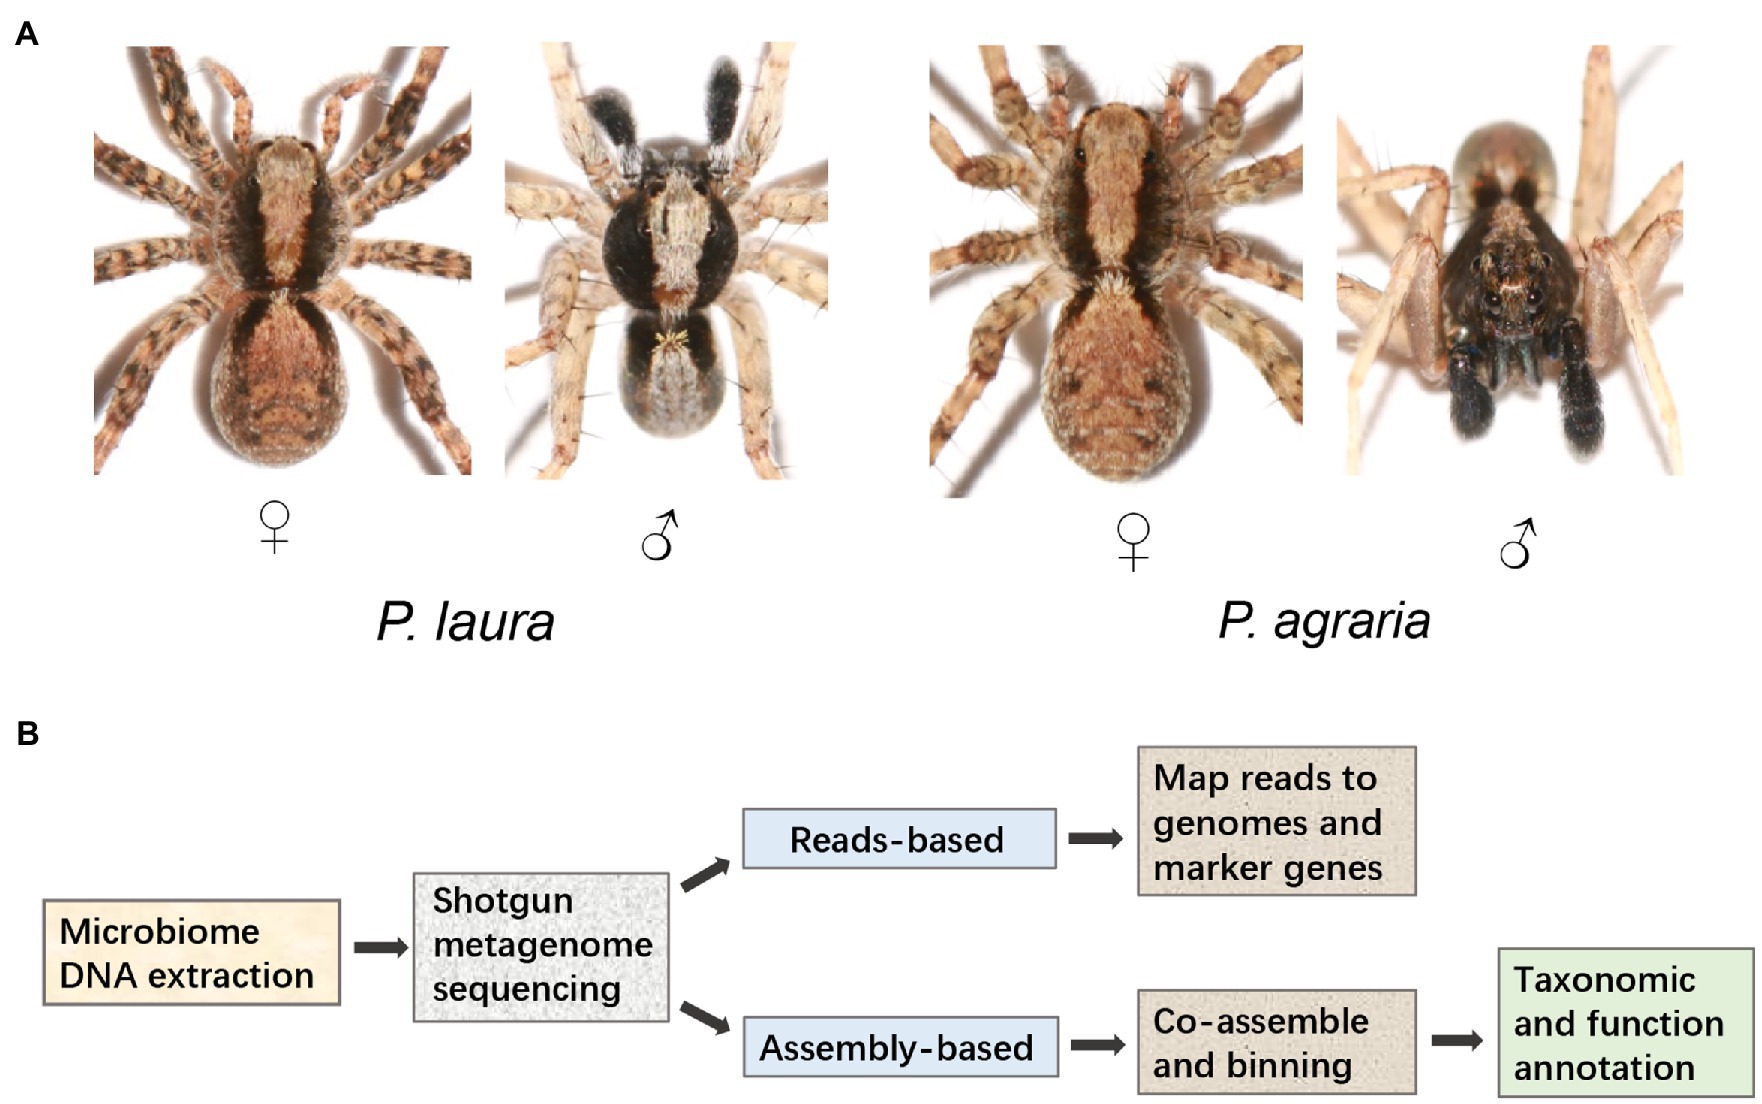 Types Of Spiders With Pictures & Facts: Main Spider Groups